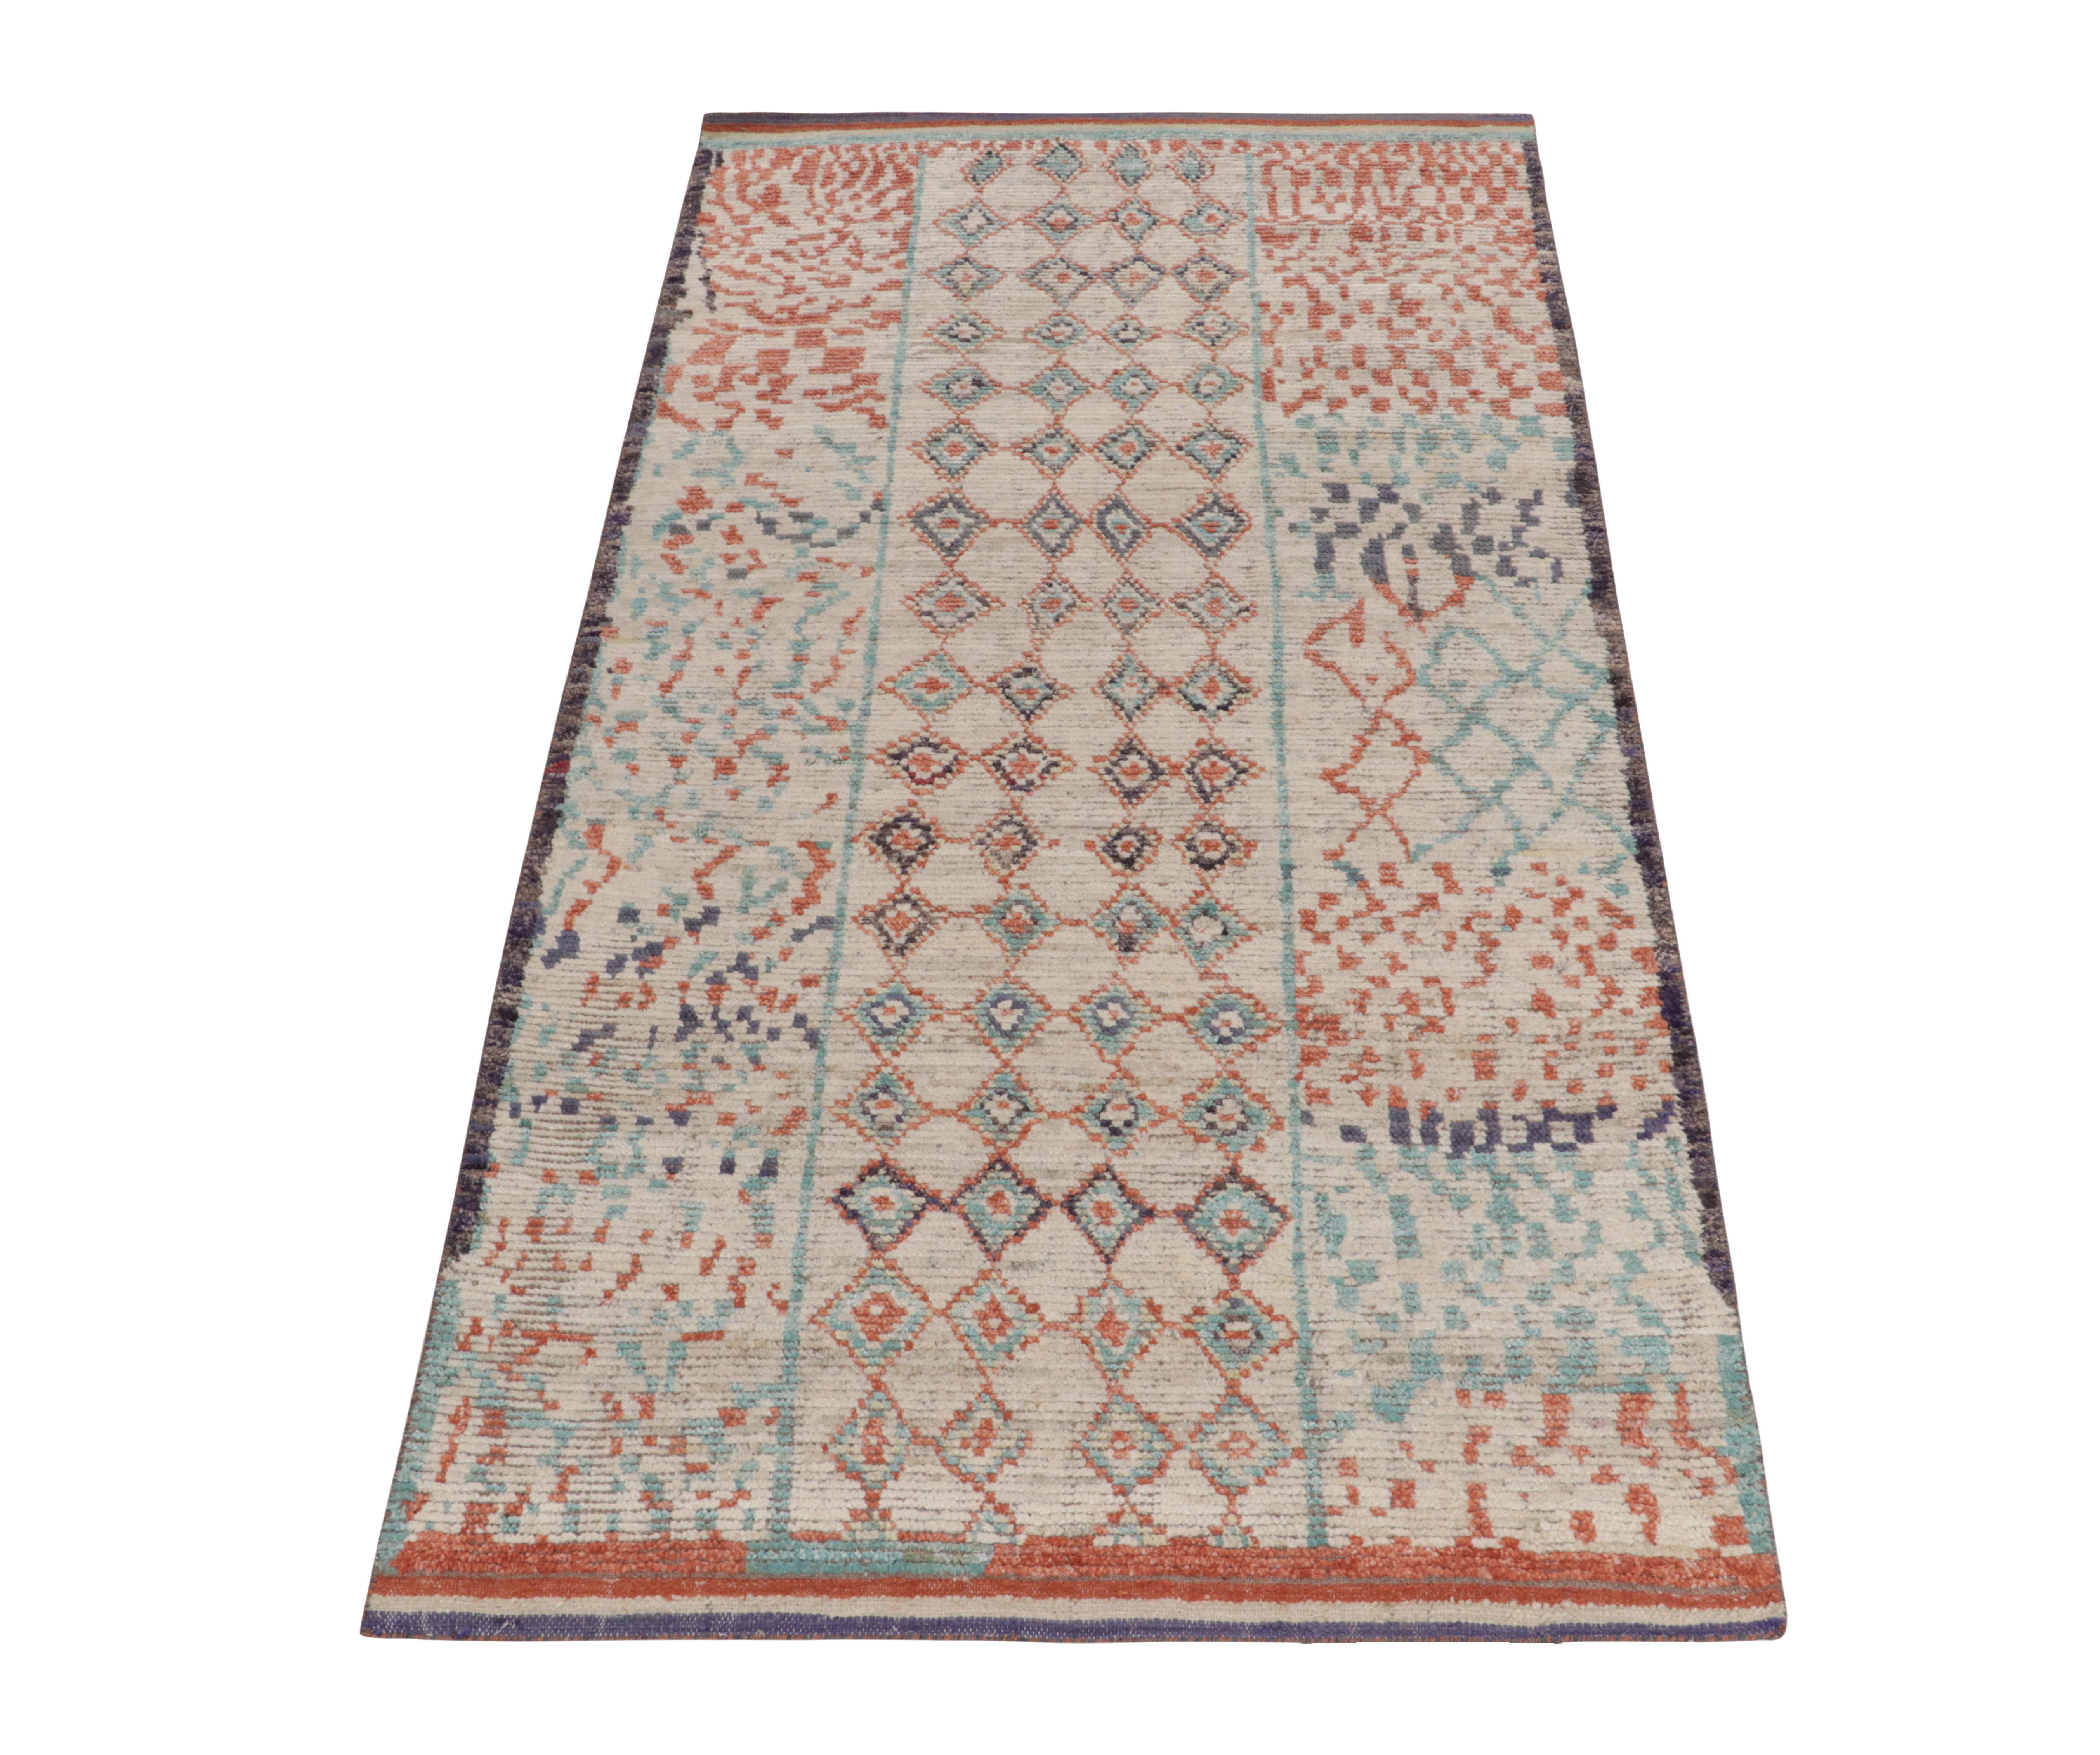 Rug & Kilim’s original ode to Moroccan rug design connoting tribal aesthetics. Carrying a luscious healthy pile, the rendering nurtures a series of diamond, criss cross & dotted patterns in light blue, tangerine atop comfortable beige concluding to